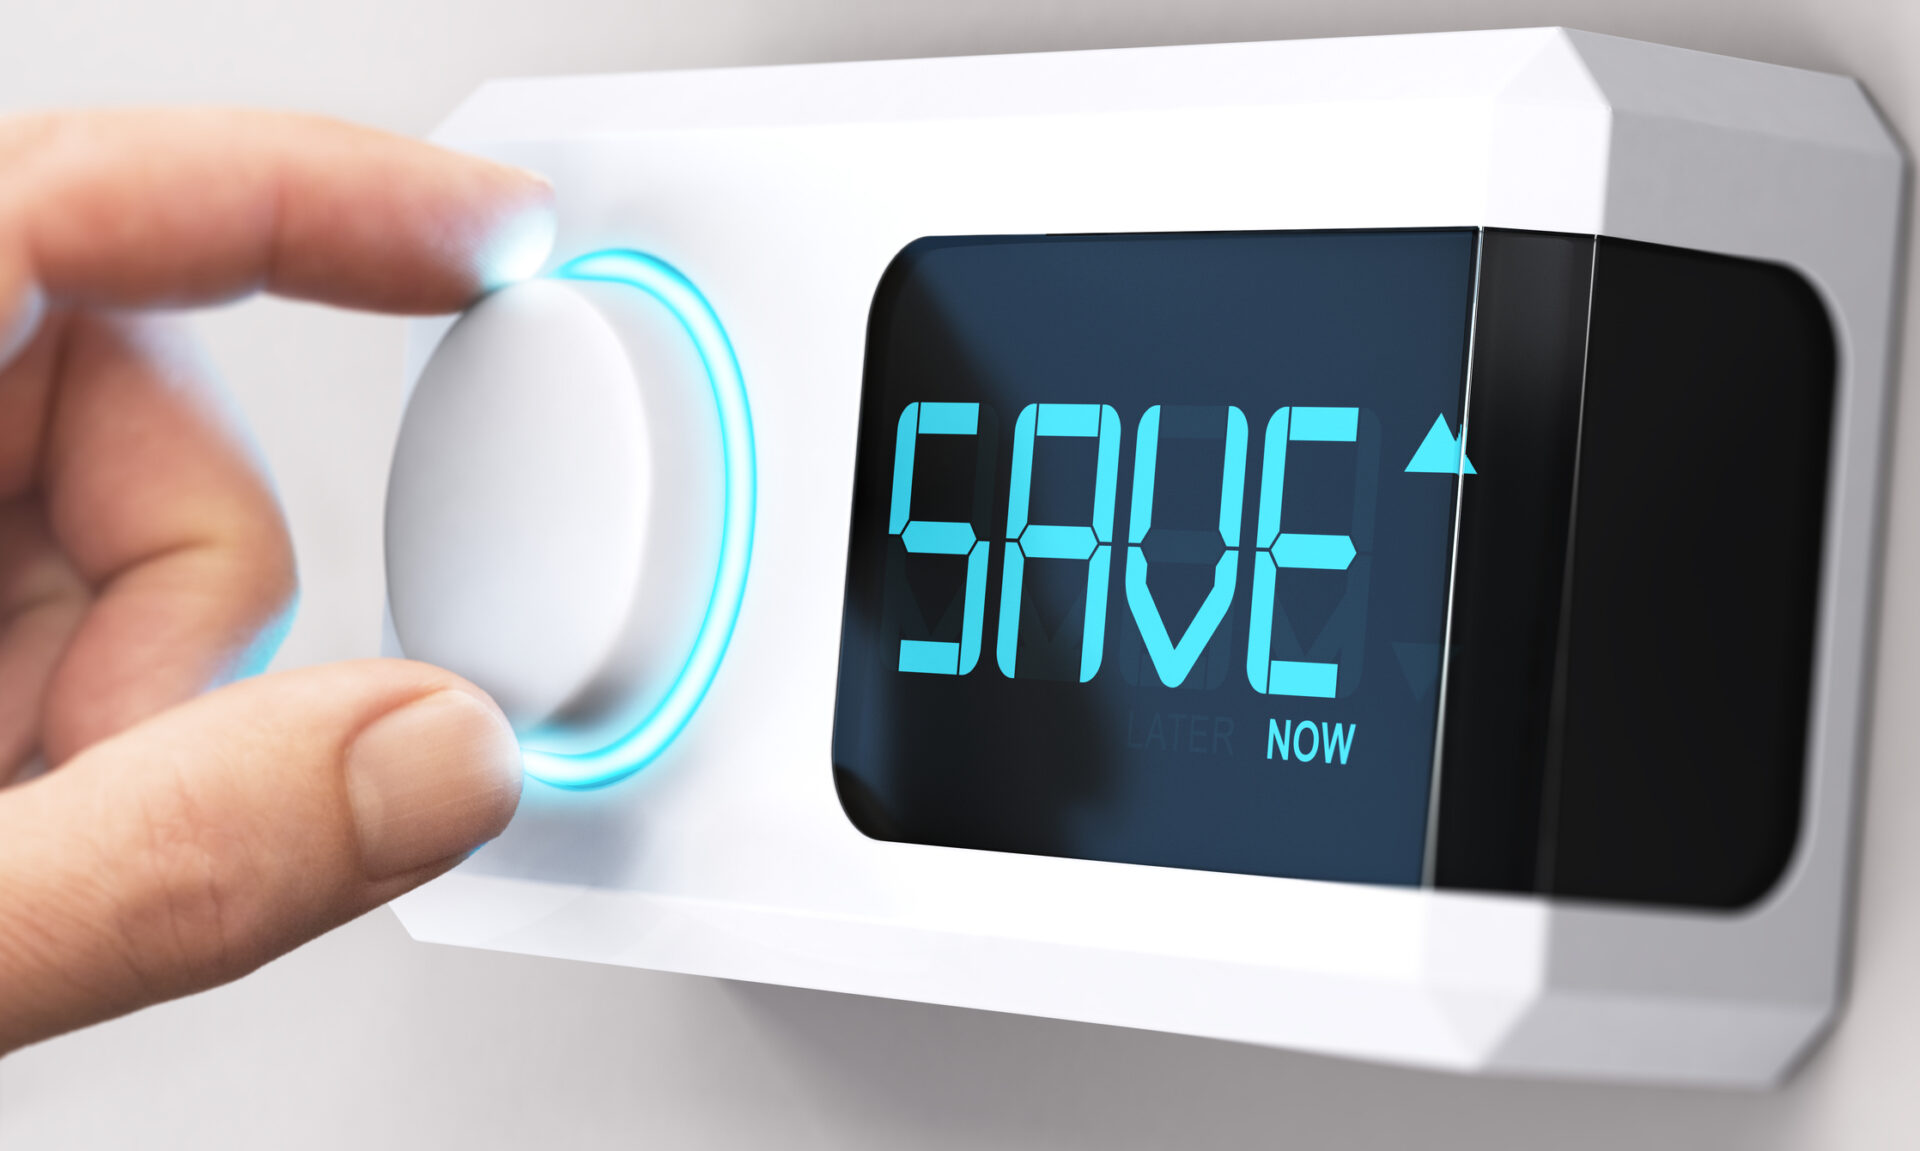 Homeowner's hand on the thermostat knob that says save now